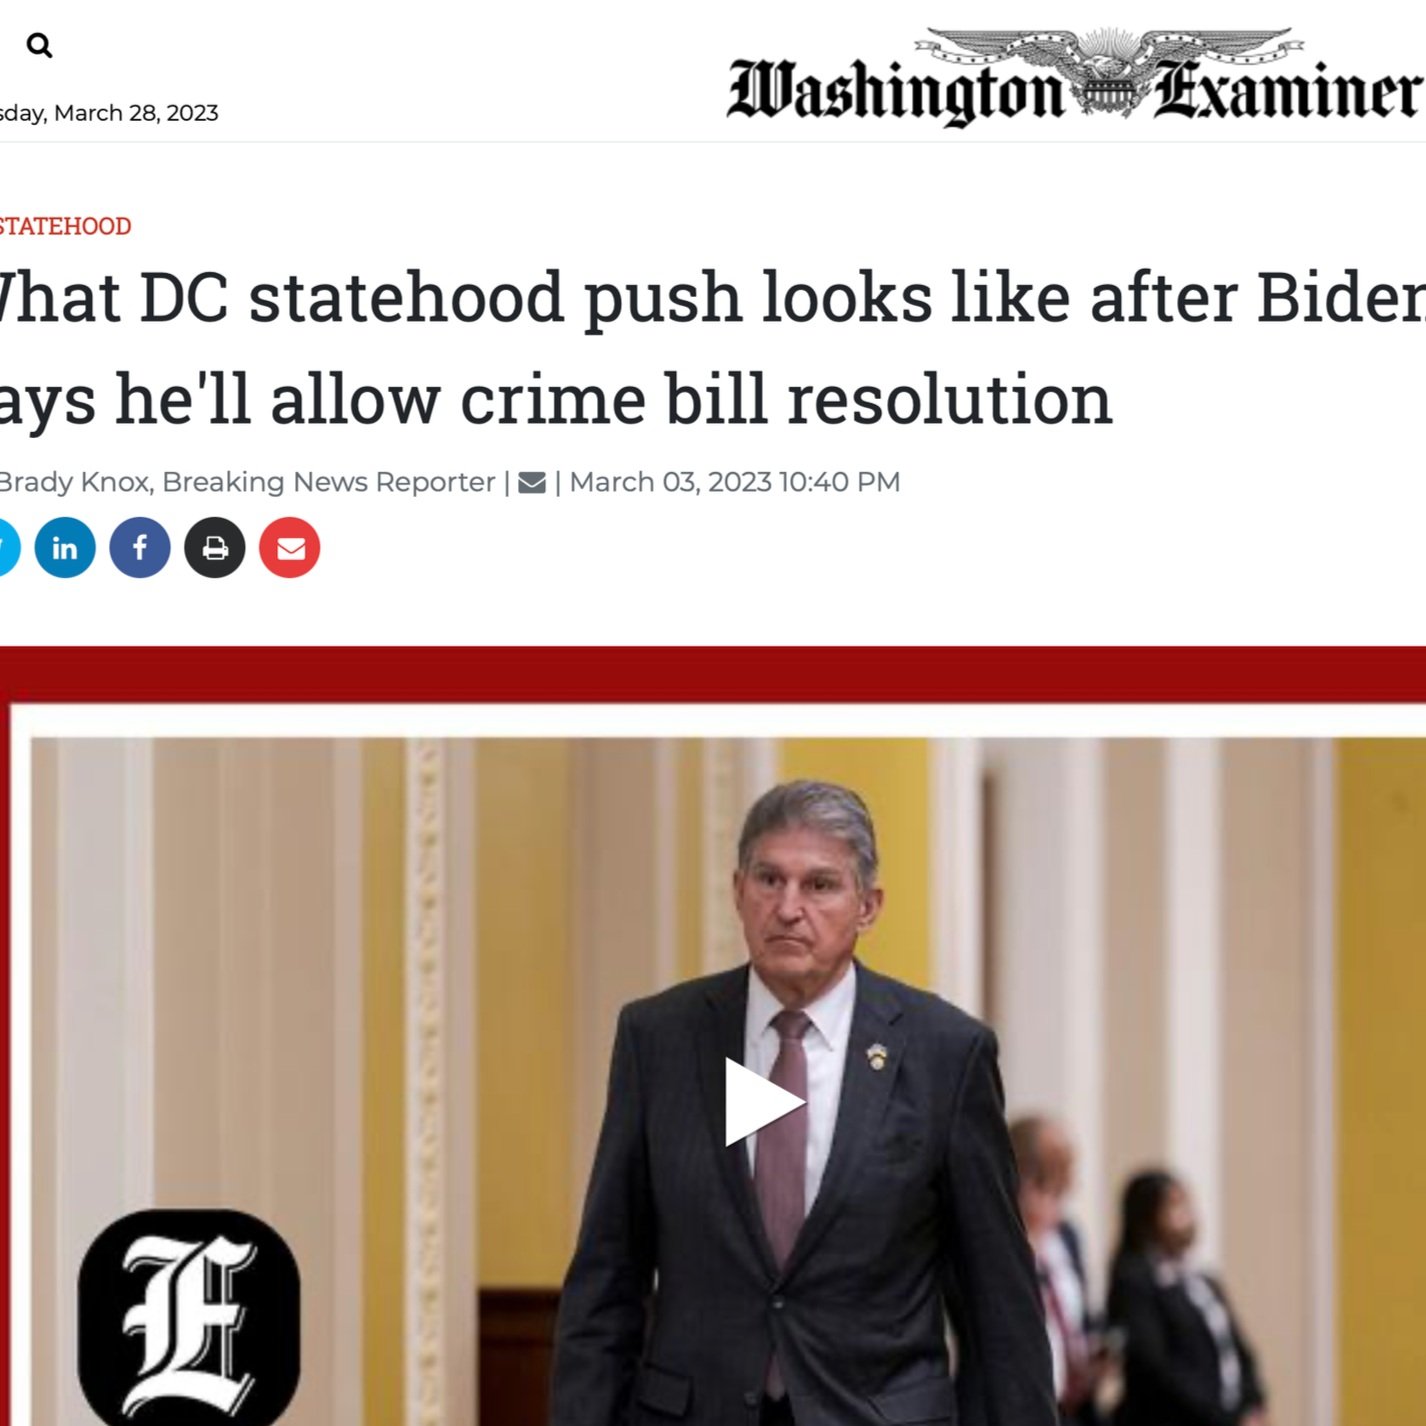 Mosheh Oinounou speaks with the&nbsp;Washington Examiner&nbsp;to give wider context to the latest developments around DC statehood.